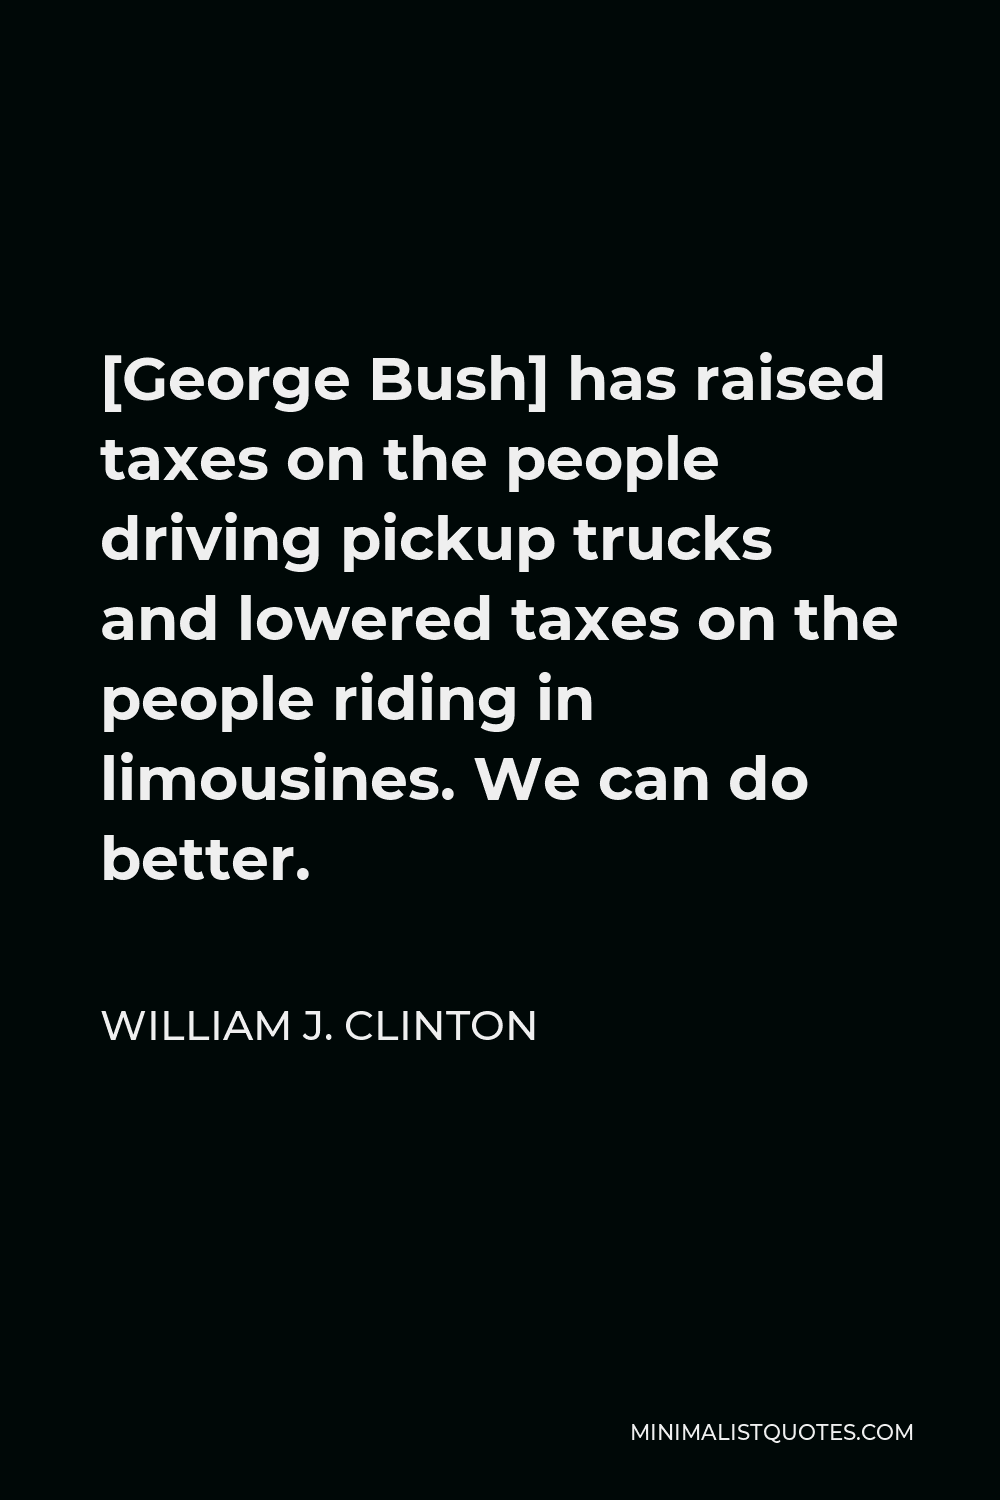 William J. Clinton Quote - [George Bush] has raised taxes on the people driving pickup trucks and lowered taxes on the people riding in limousines. We can do better.